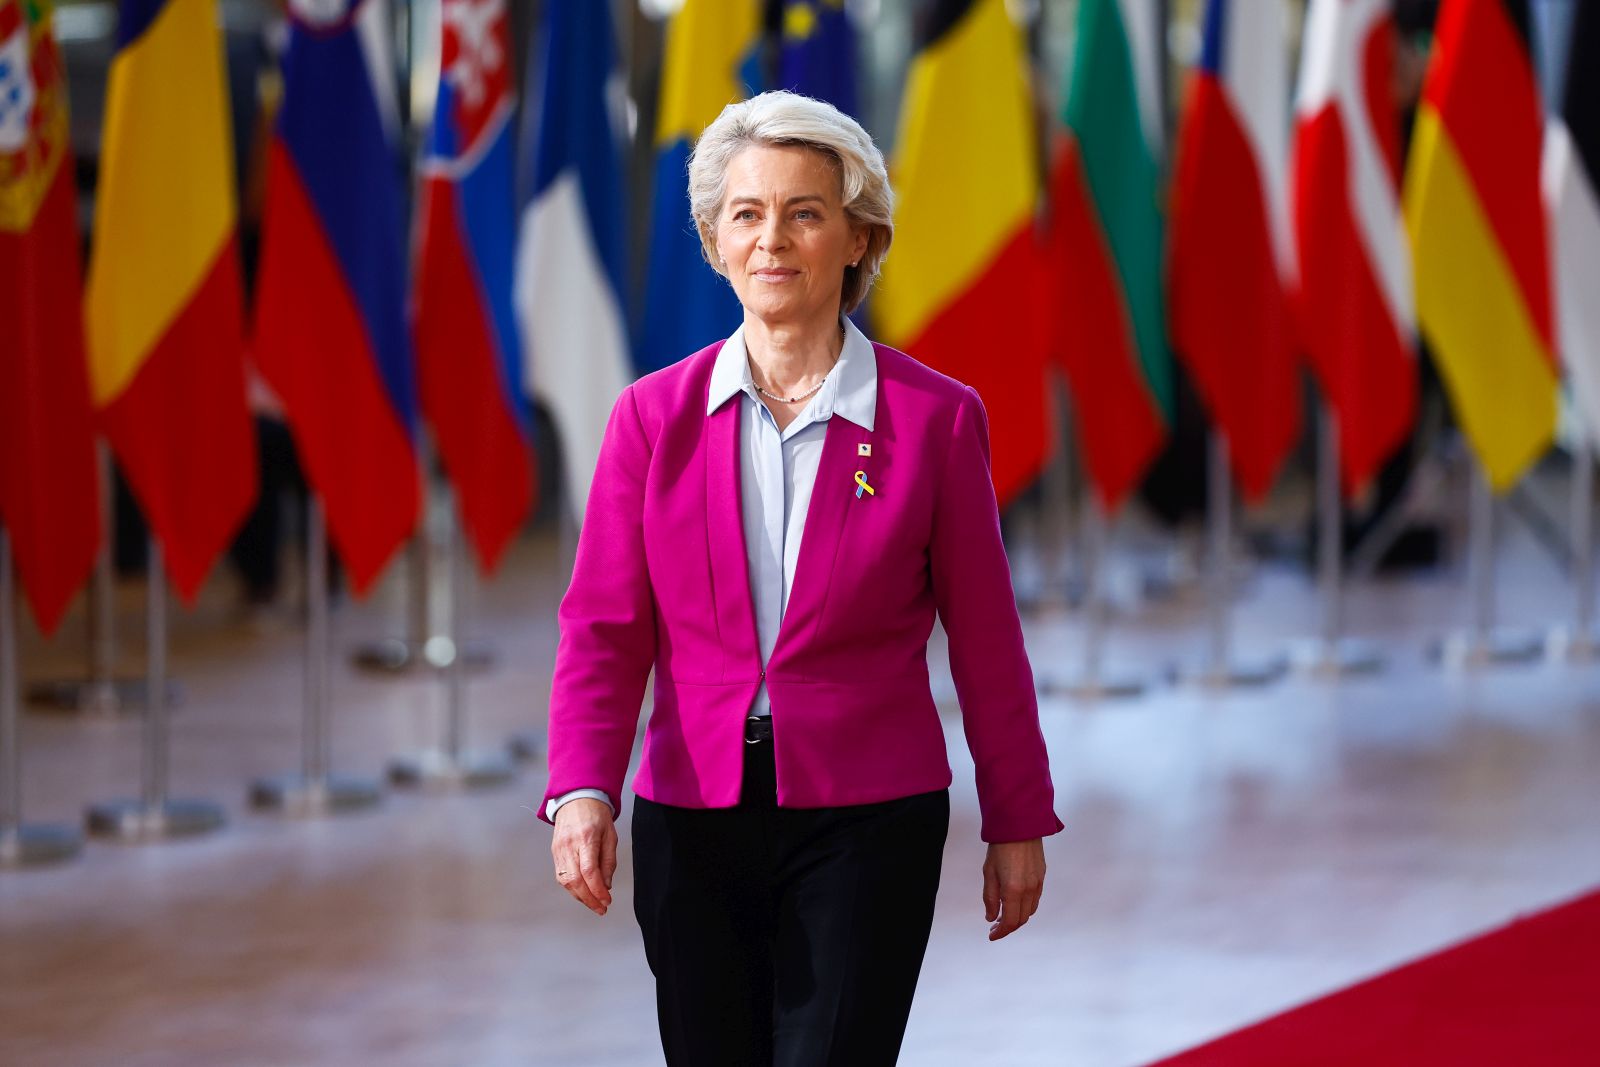 epa10254633 European Commission President Ursula von der Leyen arrives at the start of a two-day EU Council in Brussels, Belgium, 20 October 2022. The Council will gather on 20-21 October to discuss the ongoing conflict in Ukraine, the energy crisis, economic issues and external relations.  EPA/STEPHANIE LECOCQ